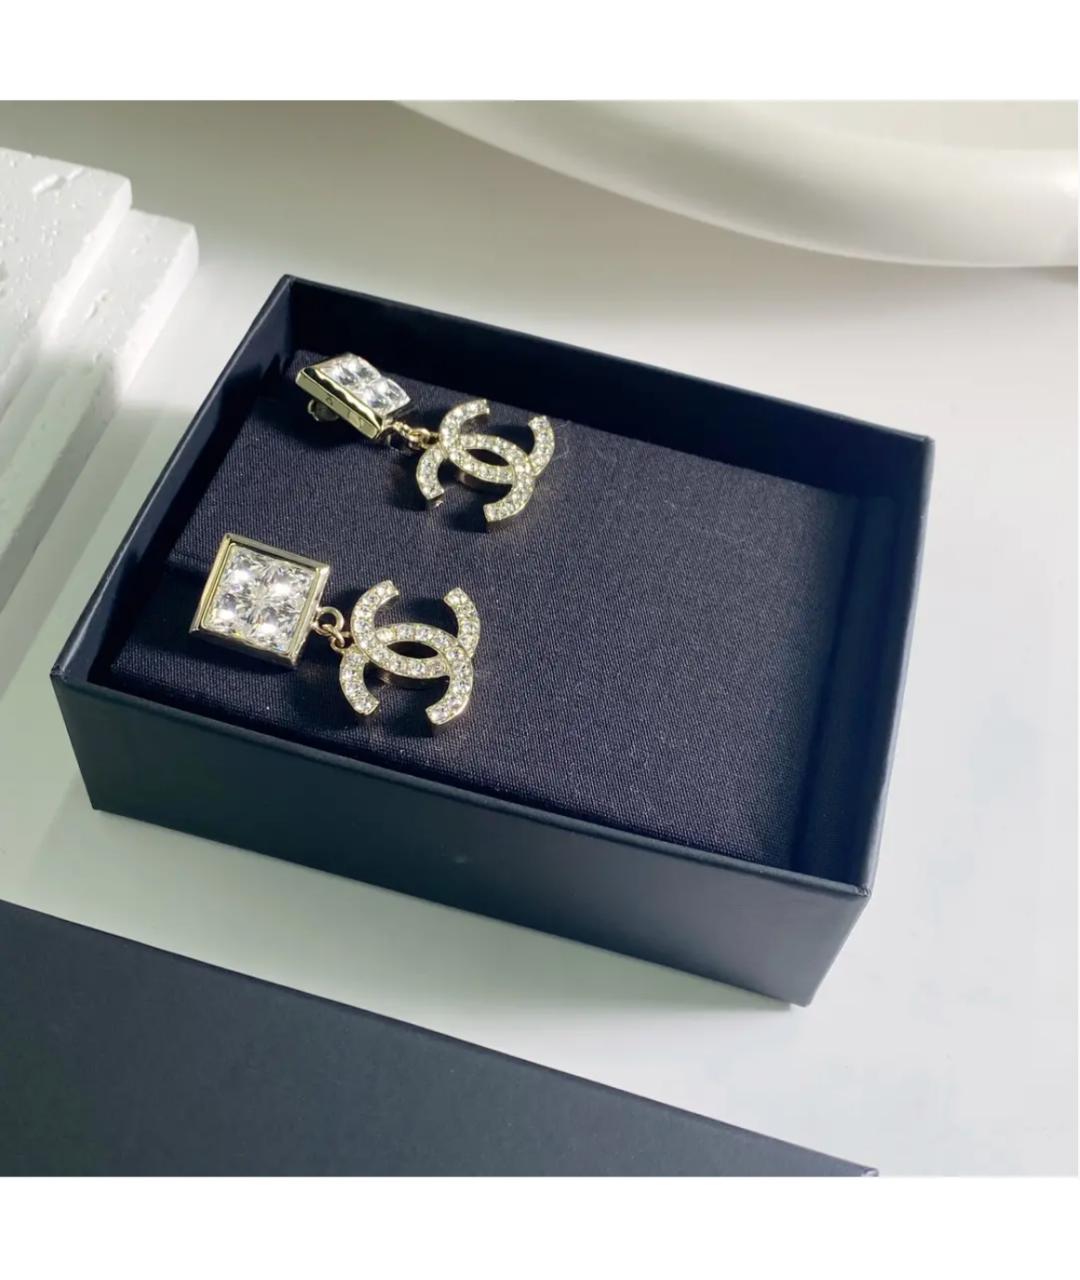 CHANEL PRE-OWNED Серьги, фото 2